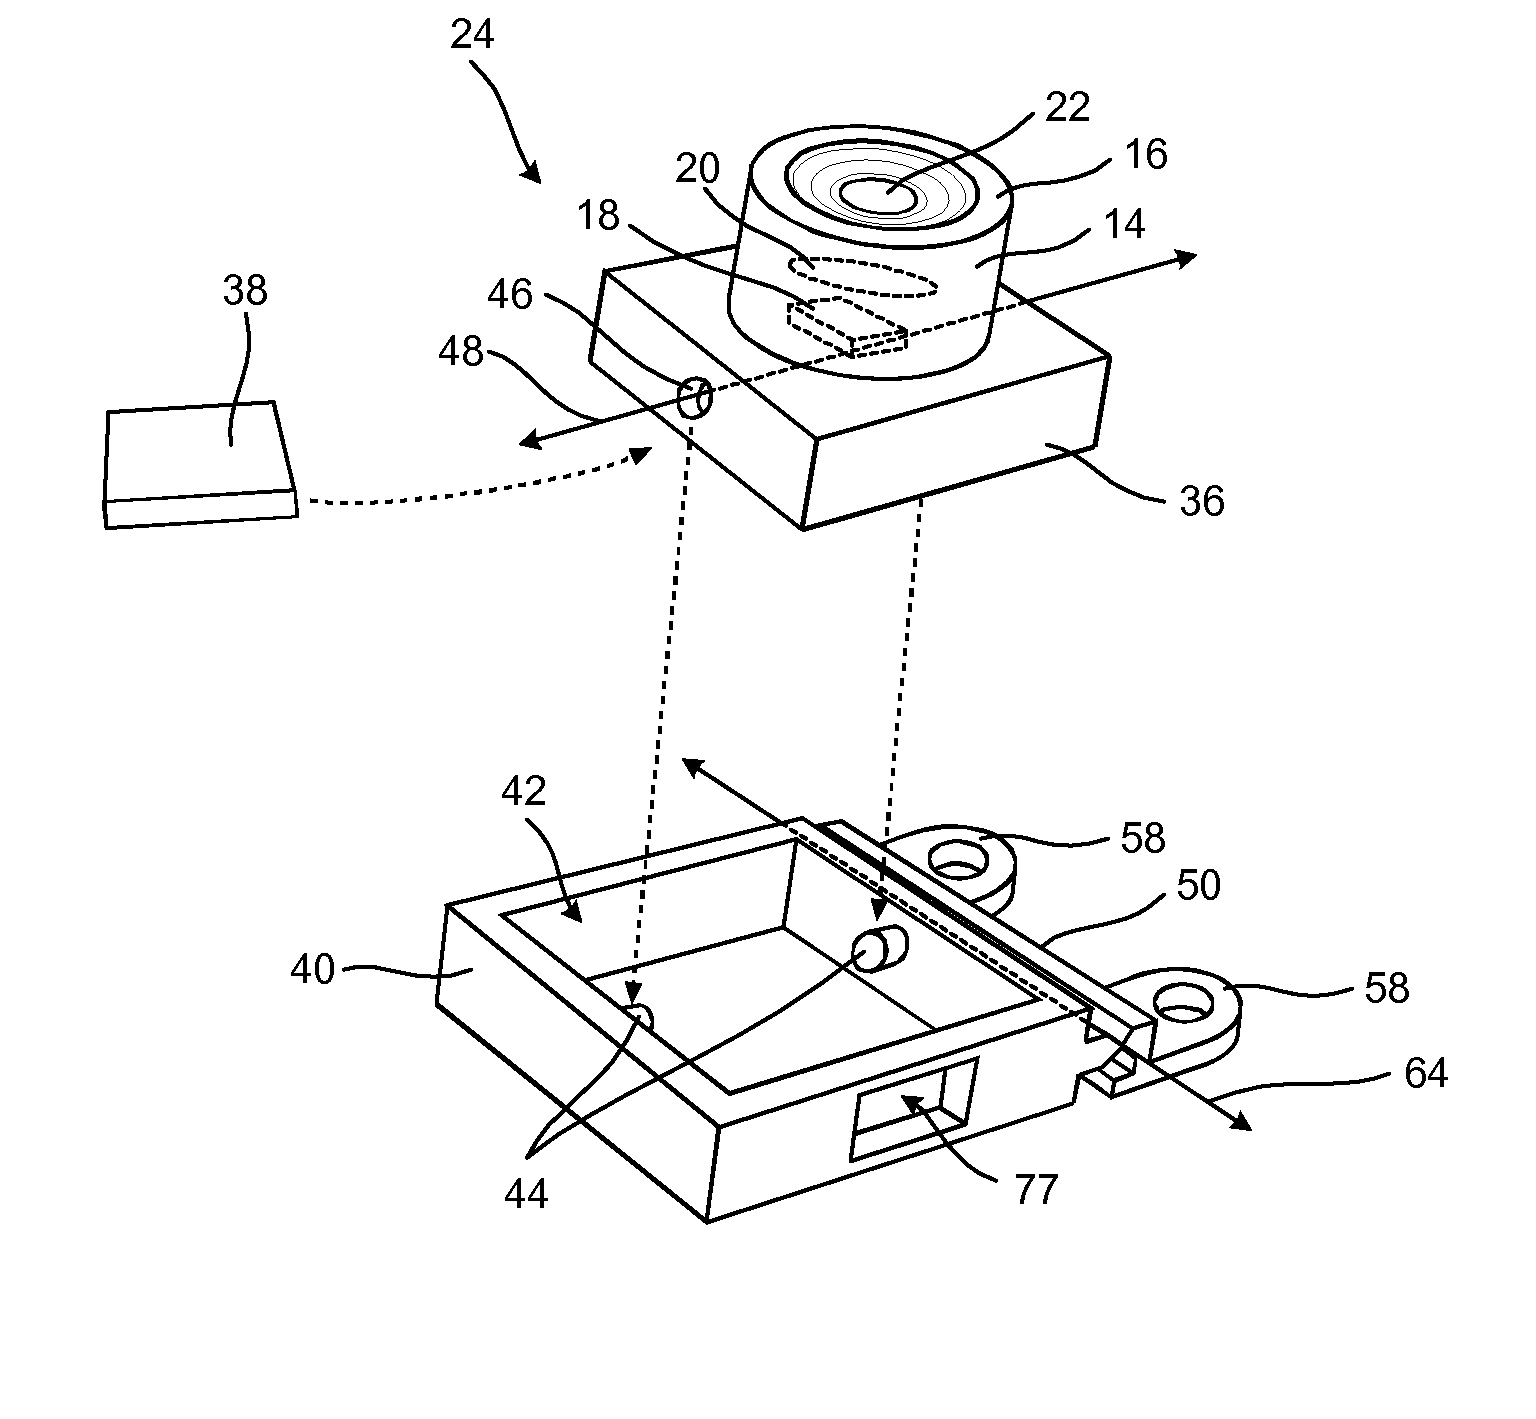 Optical device stabilizer